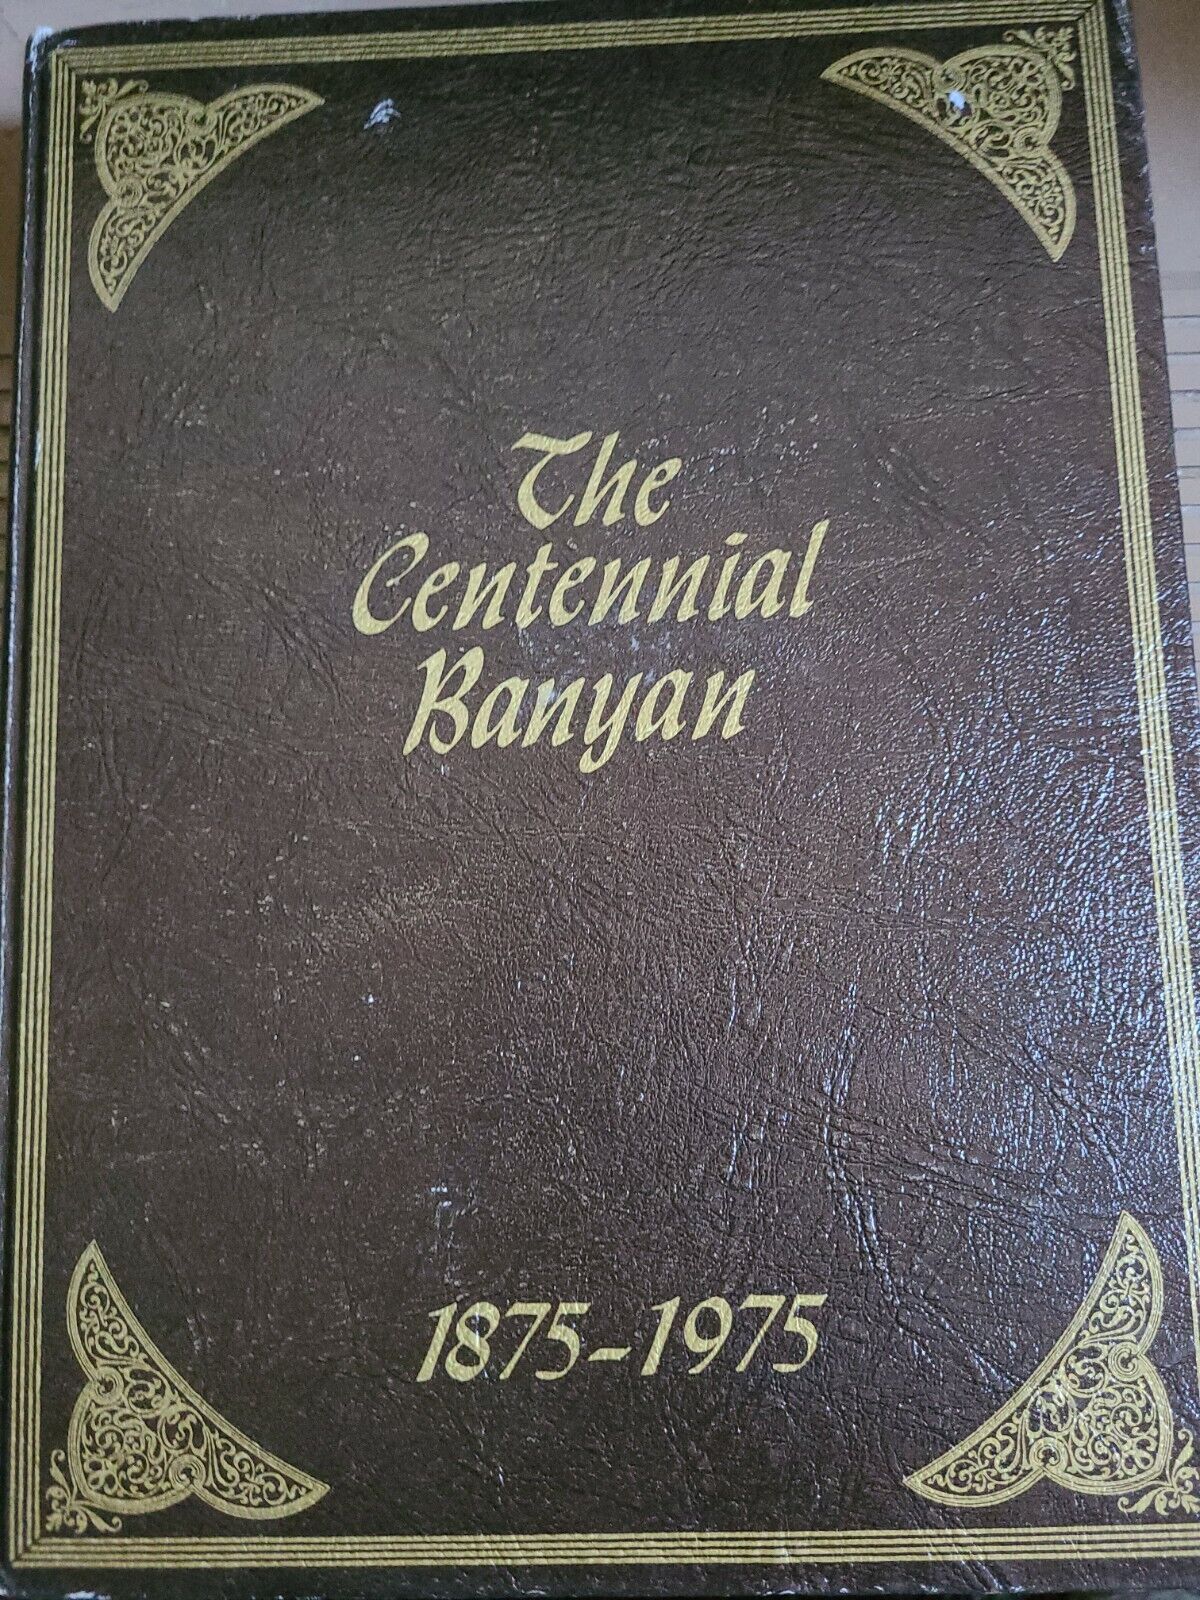 1975 Yearbook Brigham Young University Centennial Banyan With Vernon & Vance Law